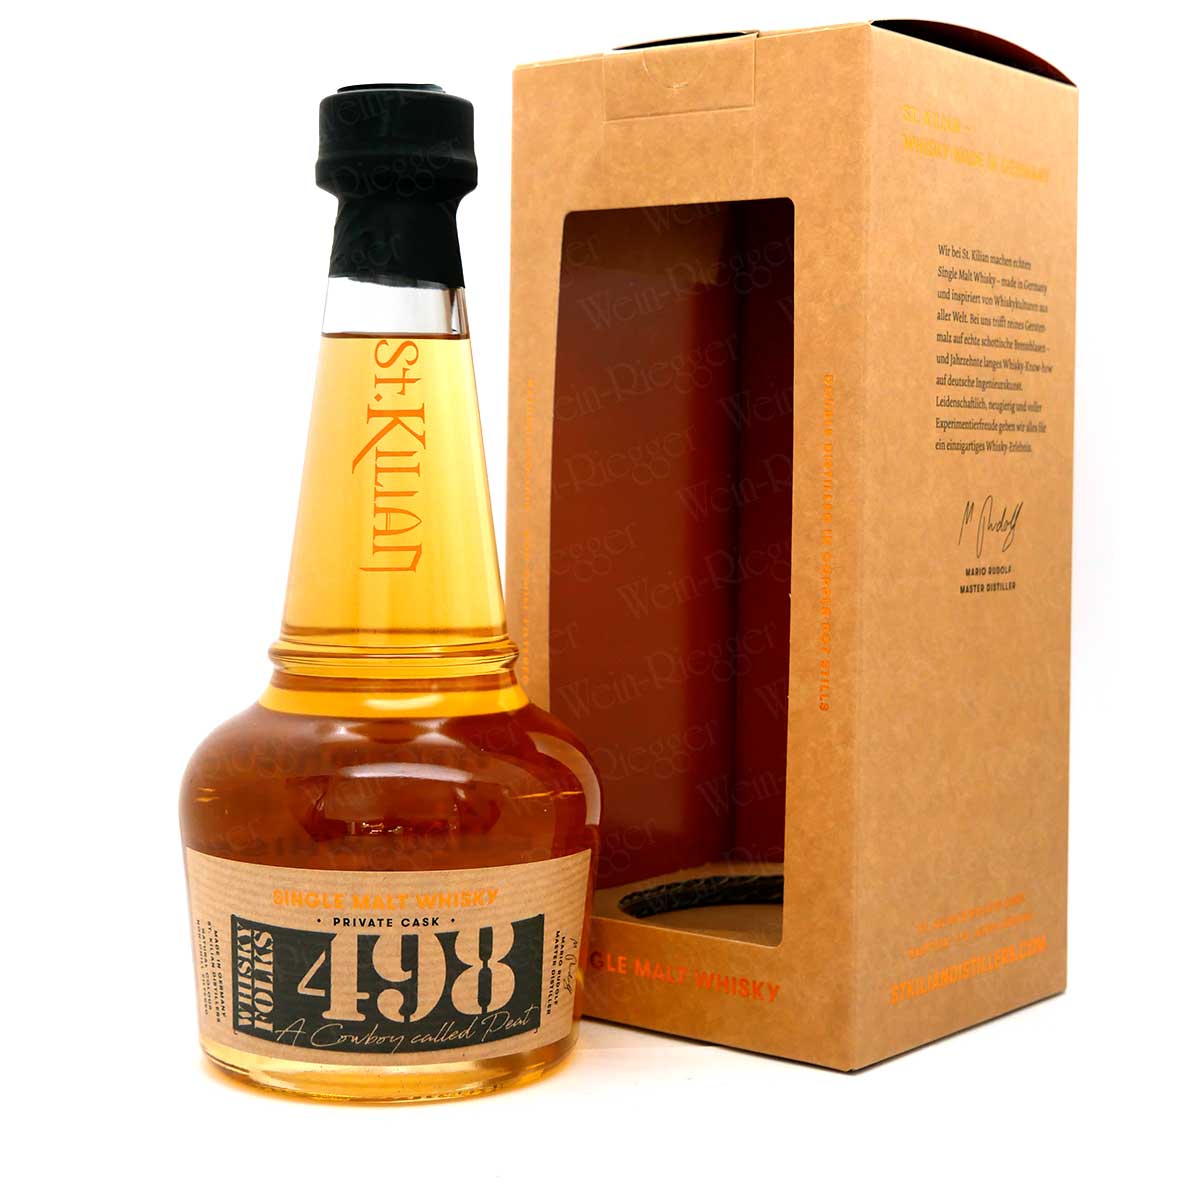 St. Kilian | 498 A Cowboy called Peat - Whisky Folks Private Cask